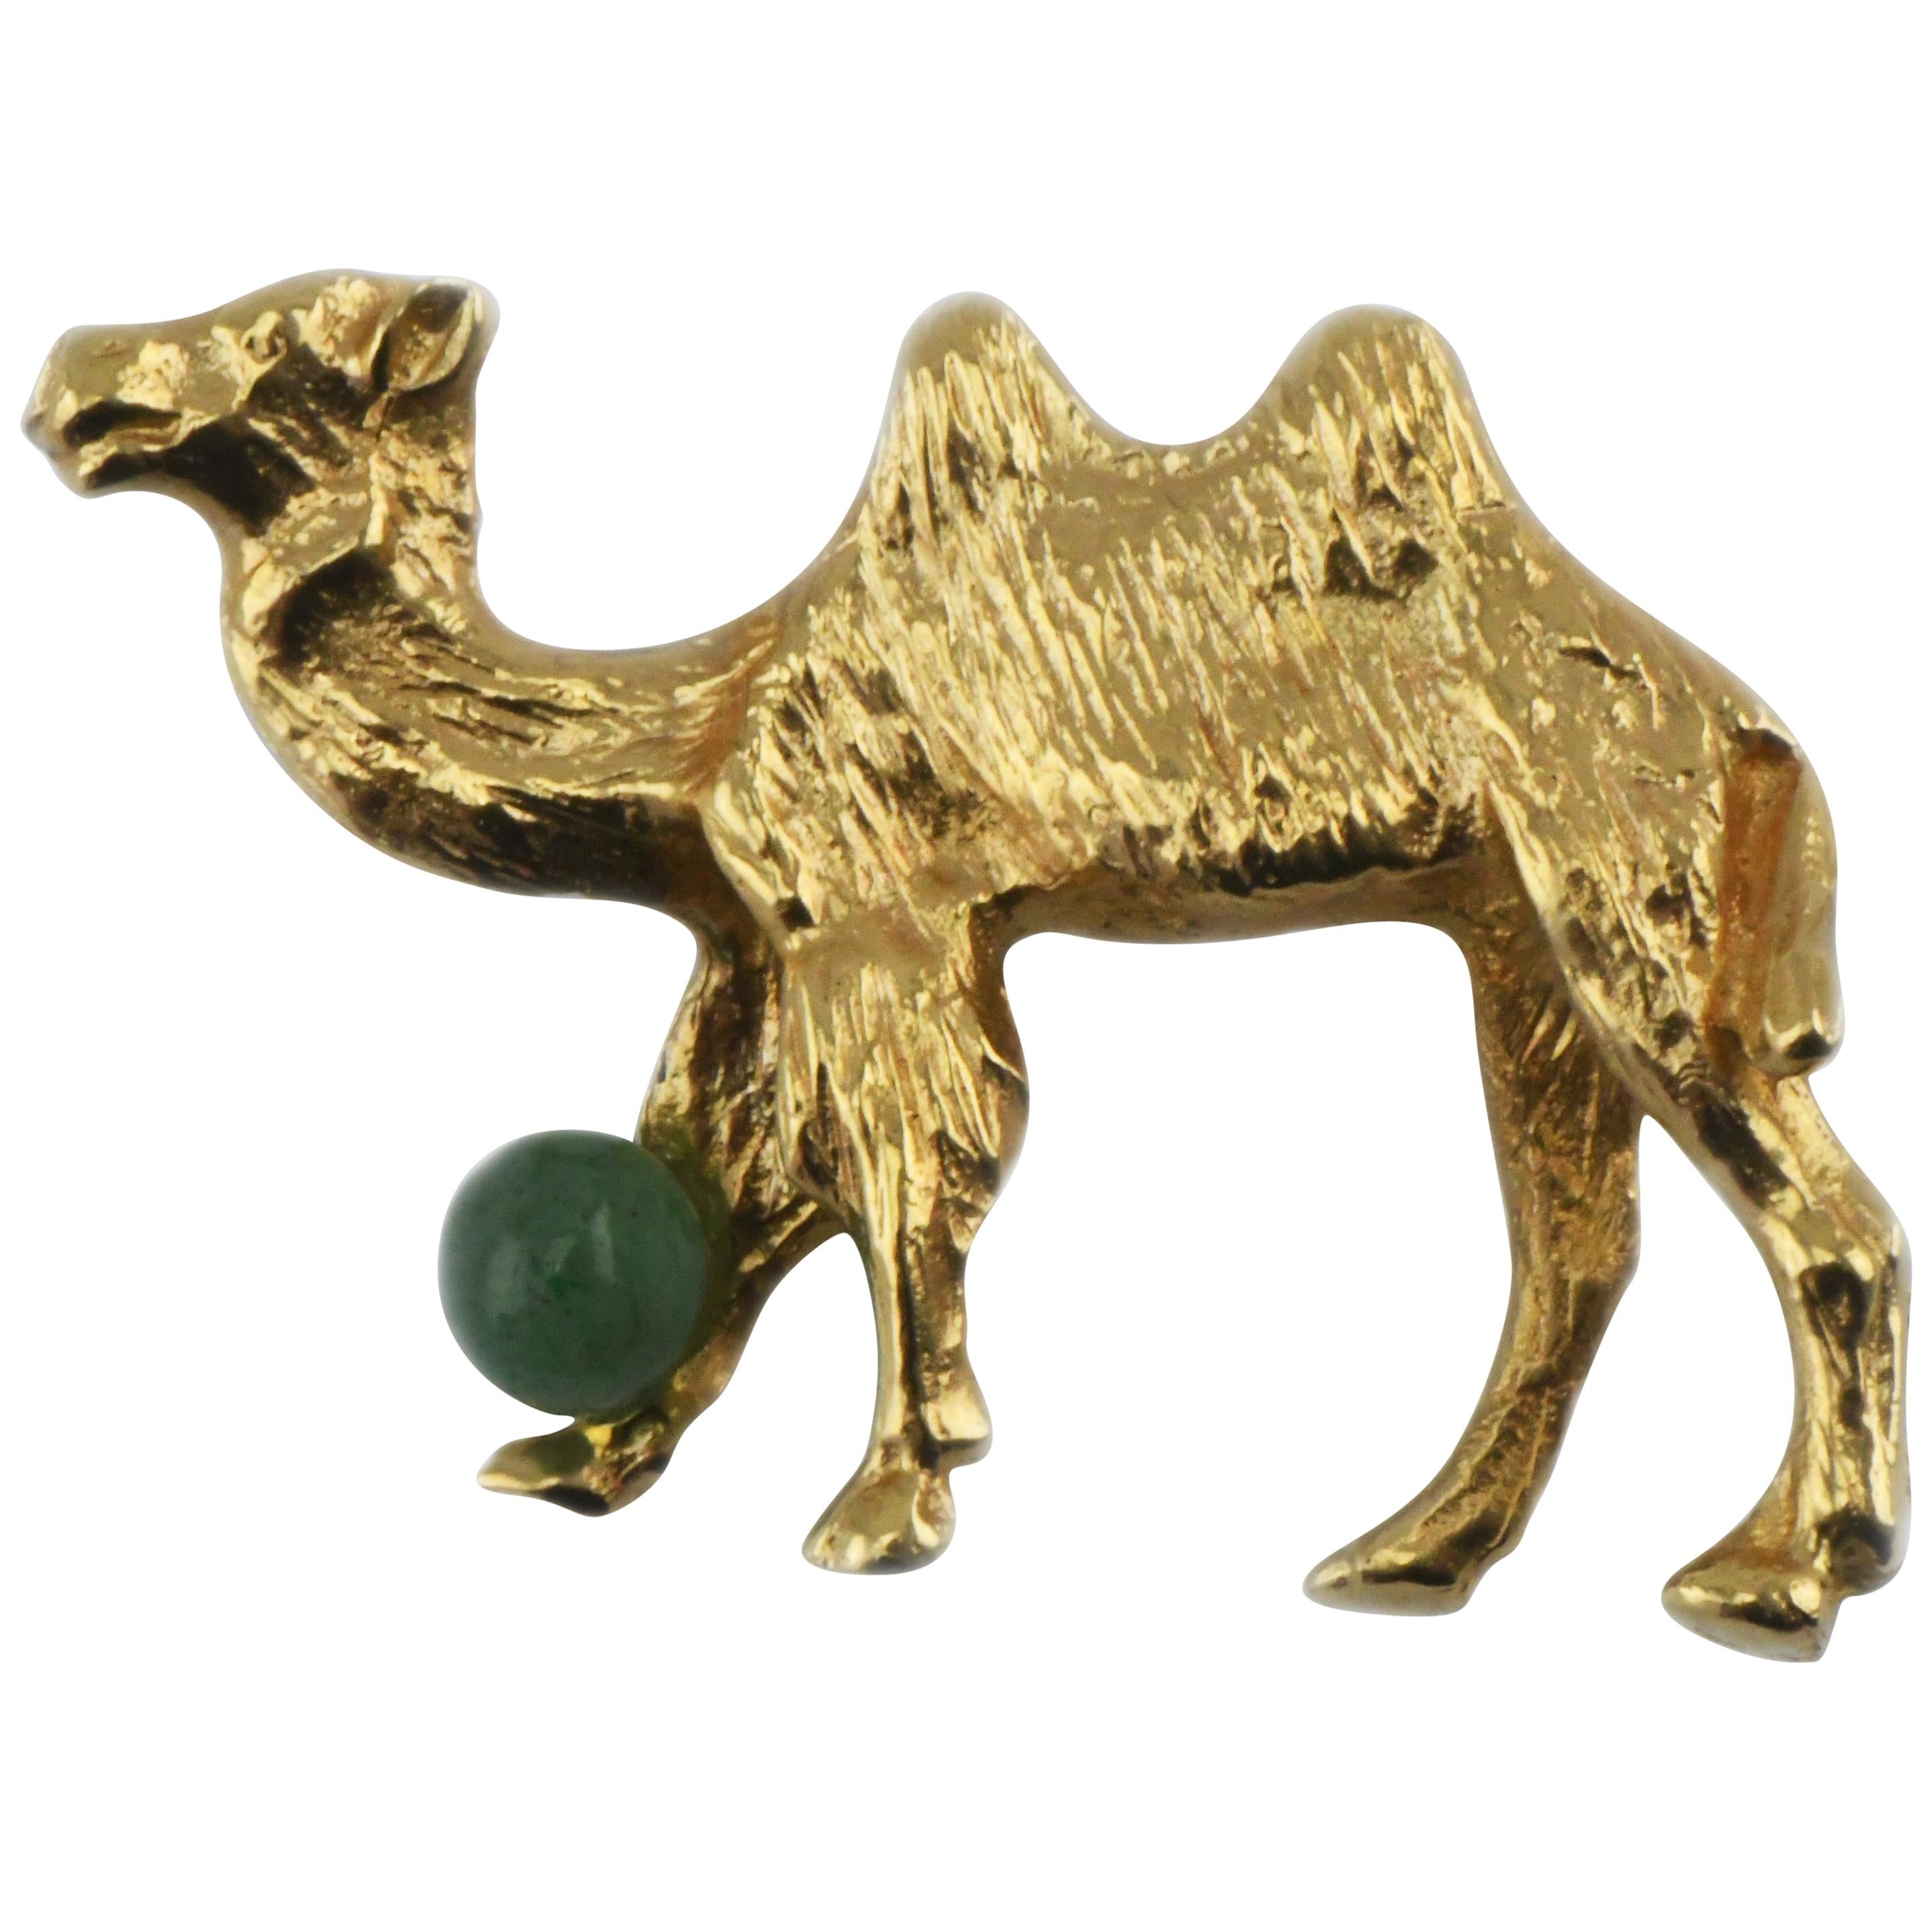 Vintage 14 Karat Gold Double Hump Camel Pin Brooch with Jade Accent